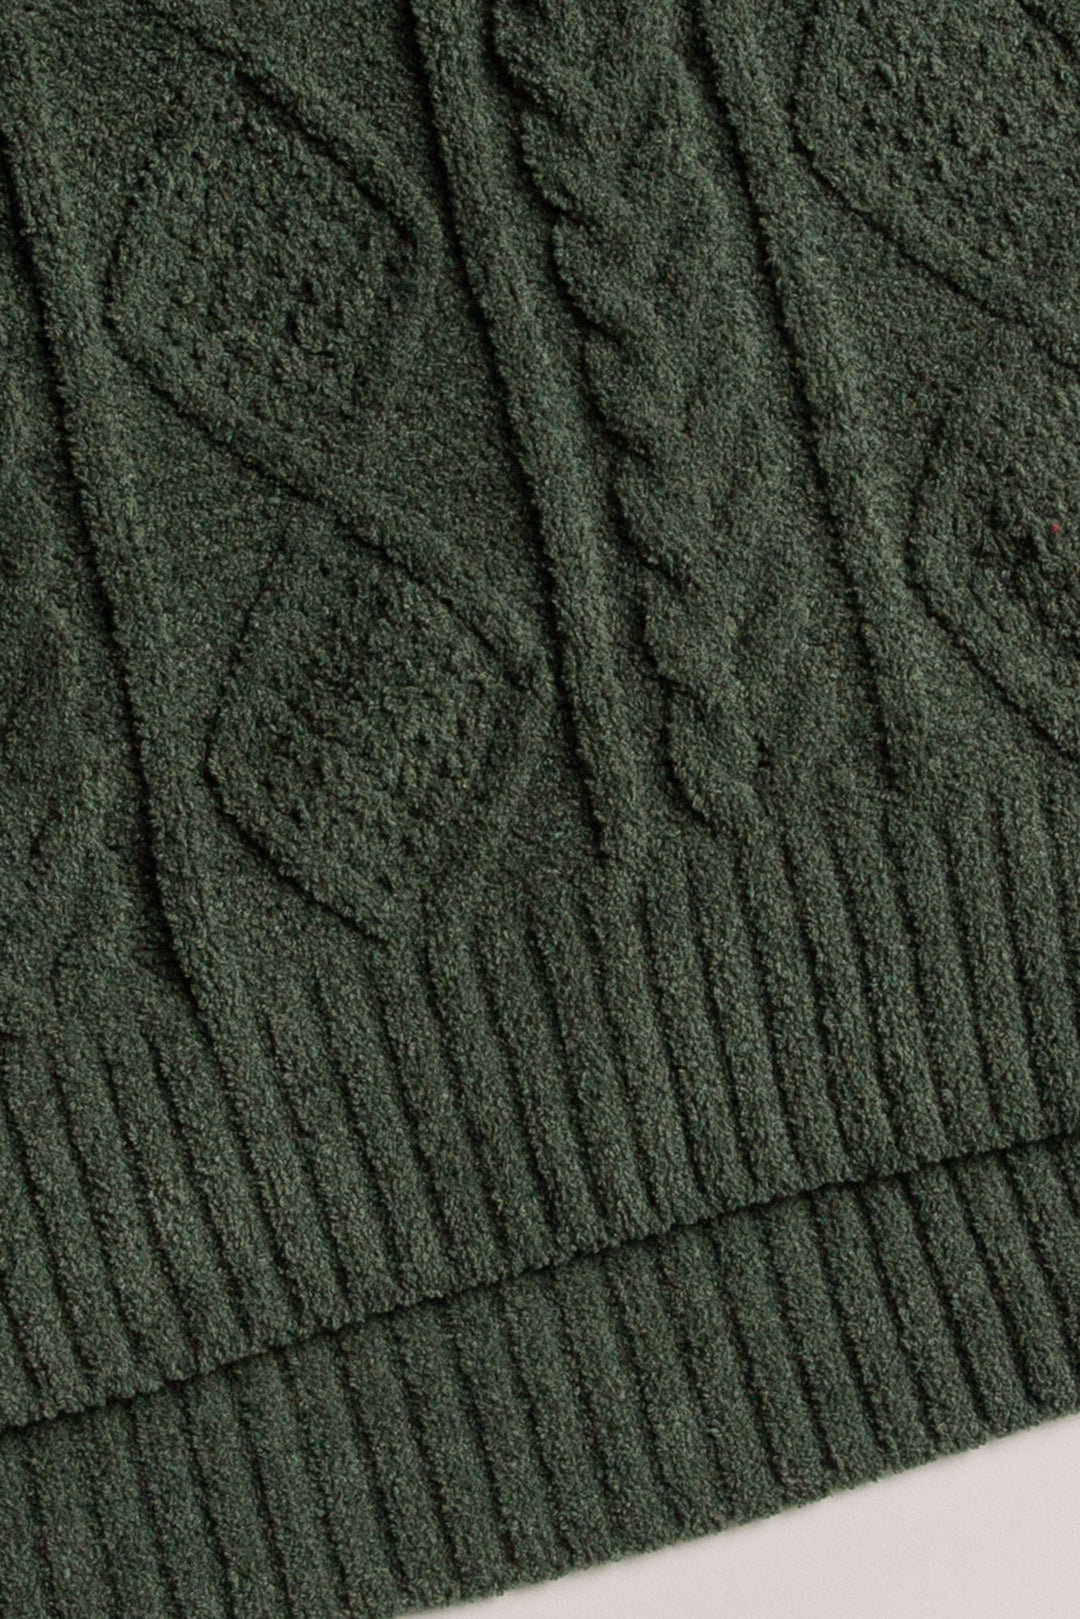 Long sleeve sweater in dark green chenille knit with cable pattern. Relaxed fit with rib cuffs/hem. (7257679396964)